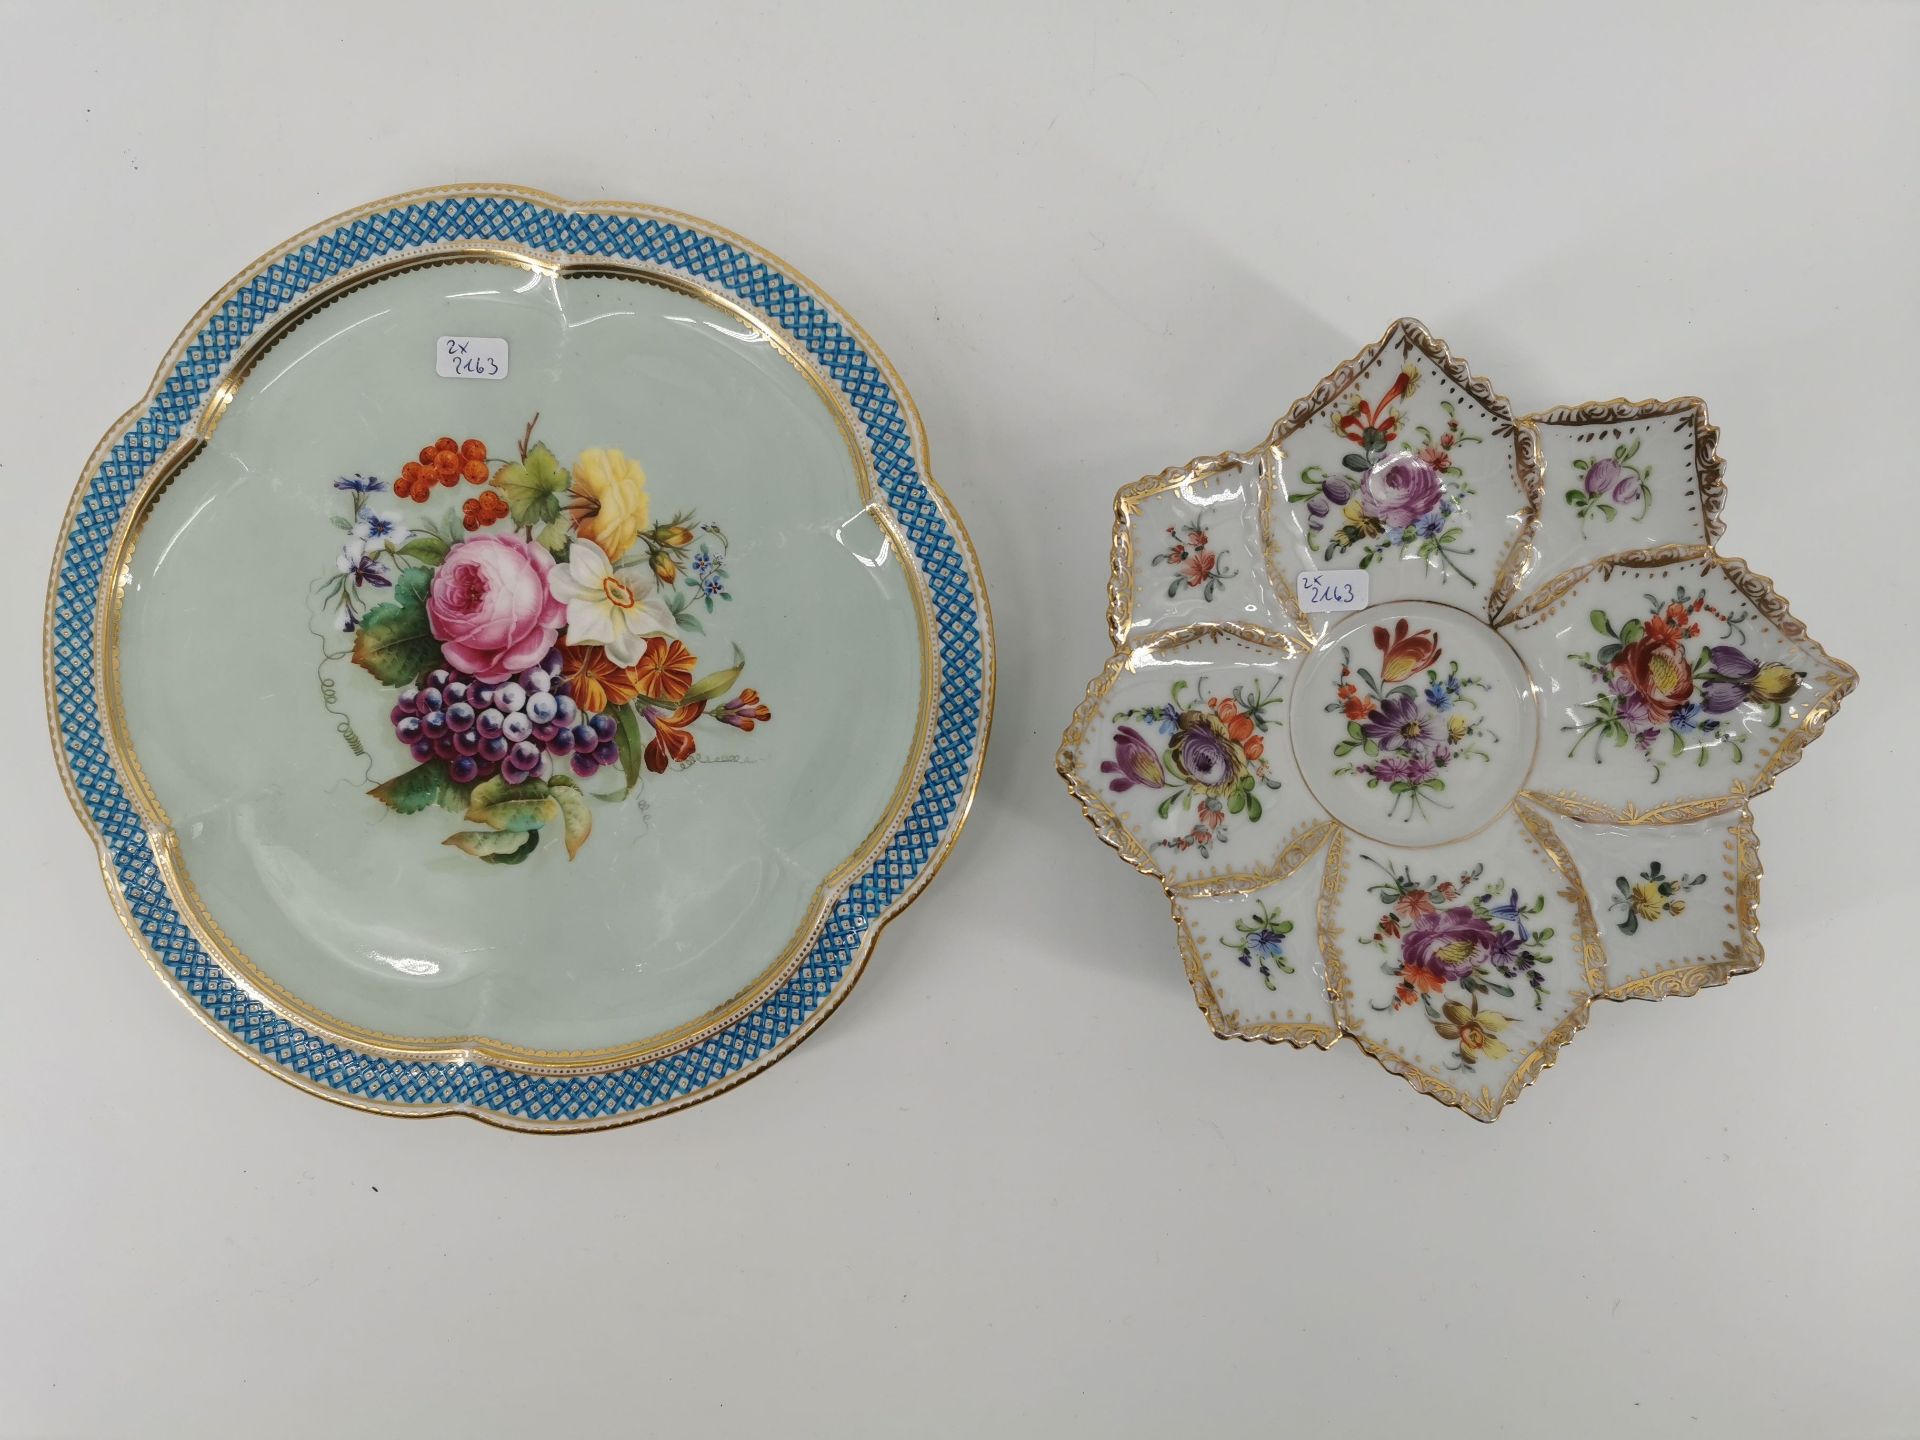 DECORATIVE BOWL AND PLATE